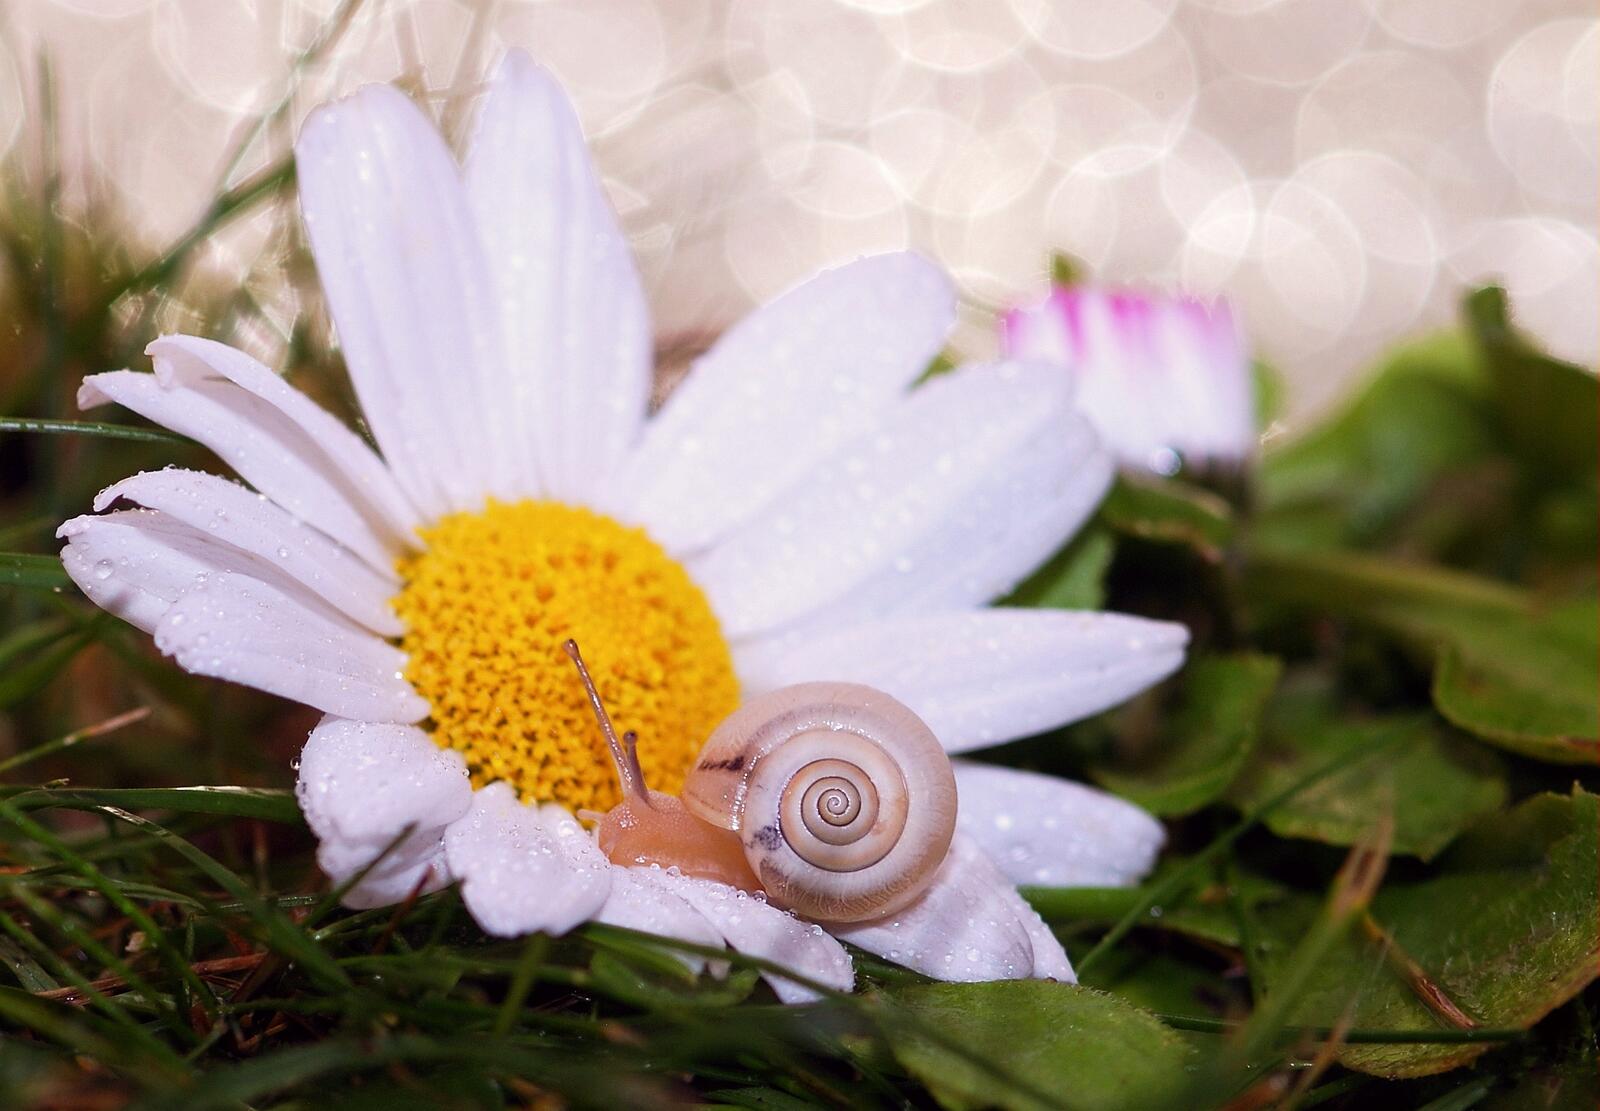 Free photo A snail crawls on a daisy with white petals.